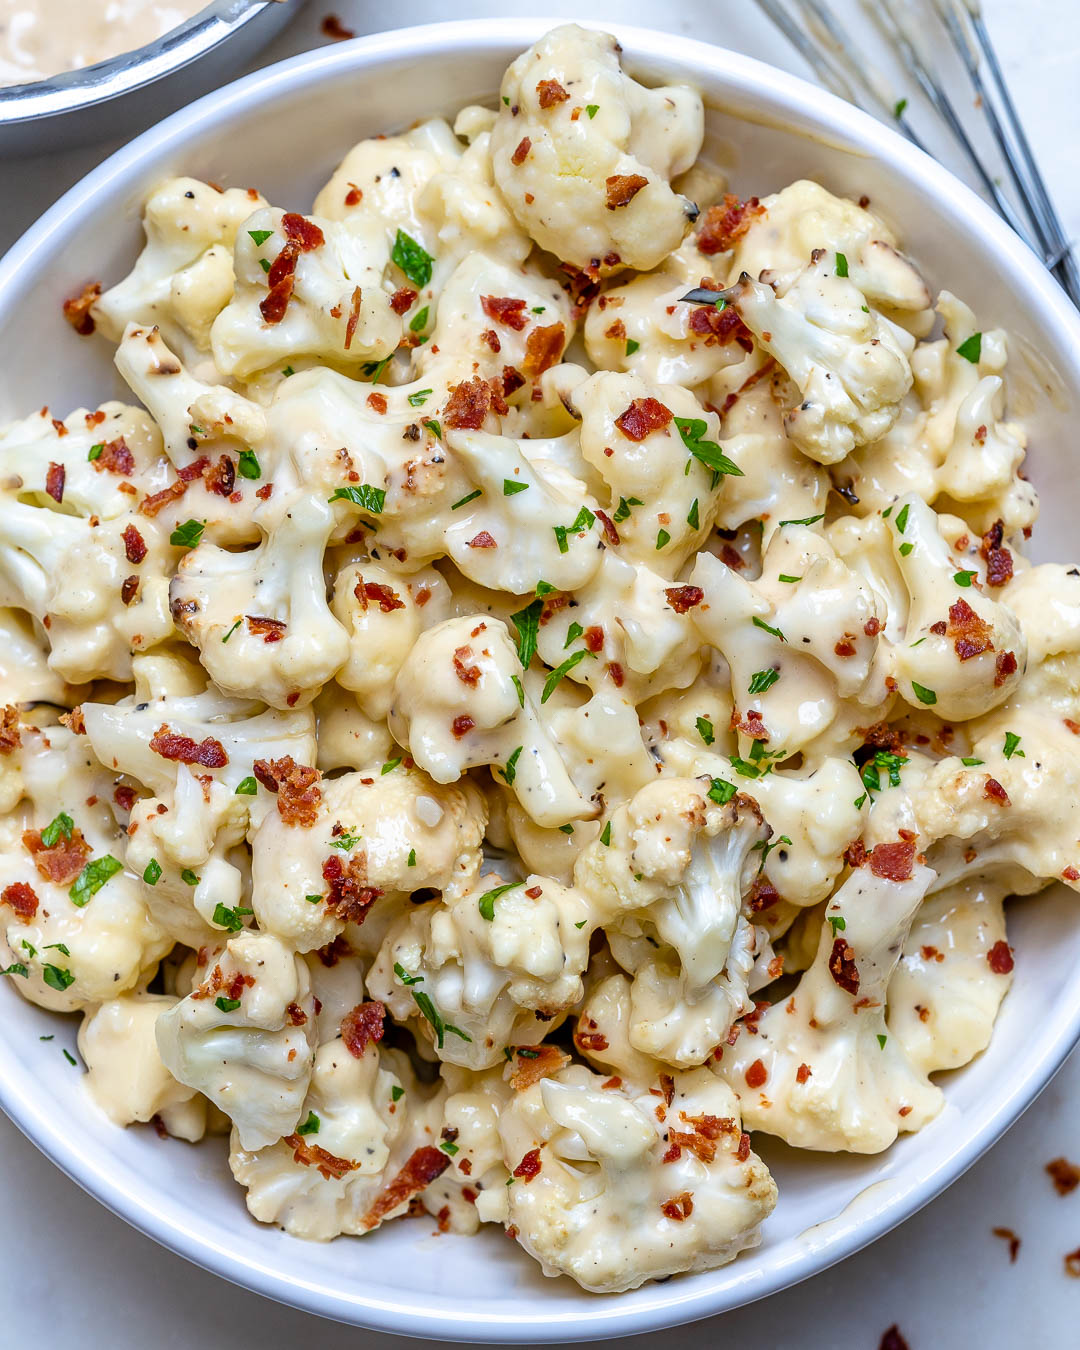 Roasted Cauli N’ Cheese (Low Carb!)